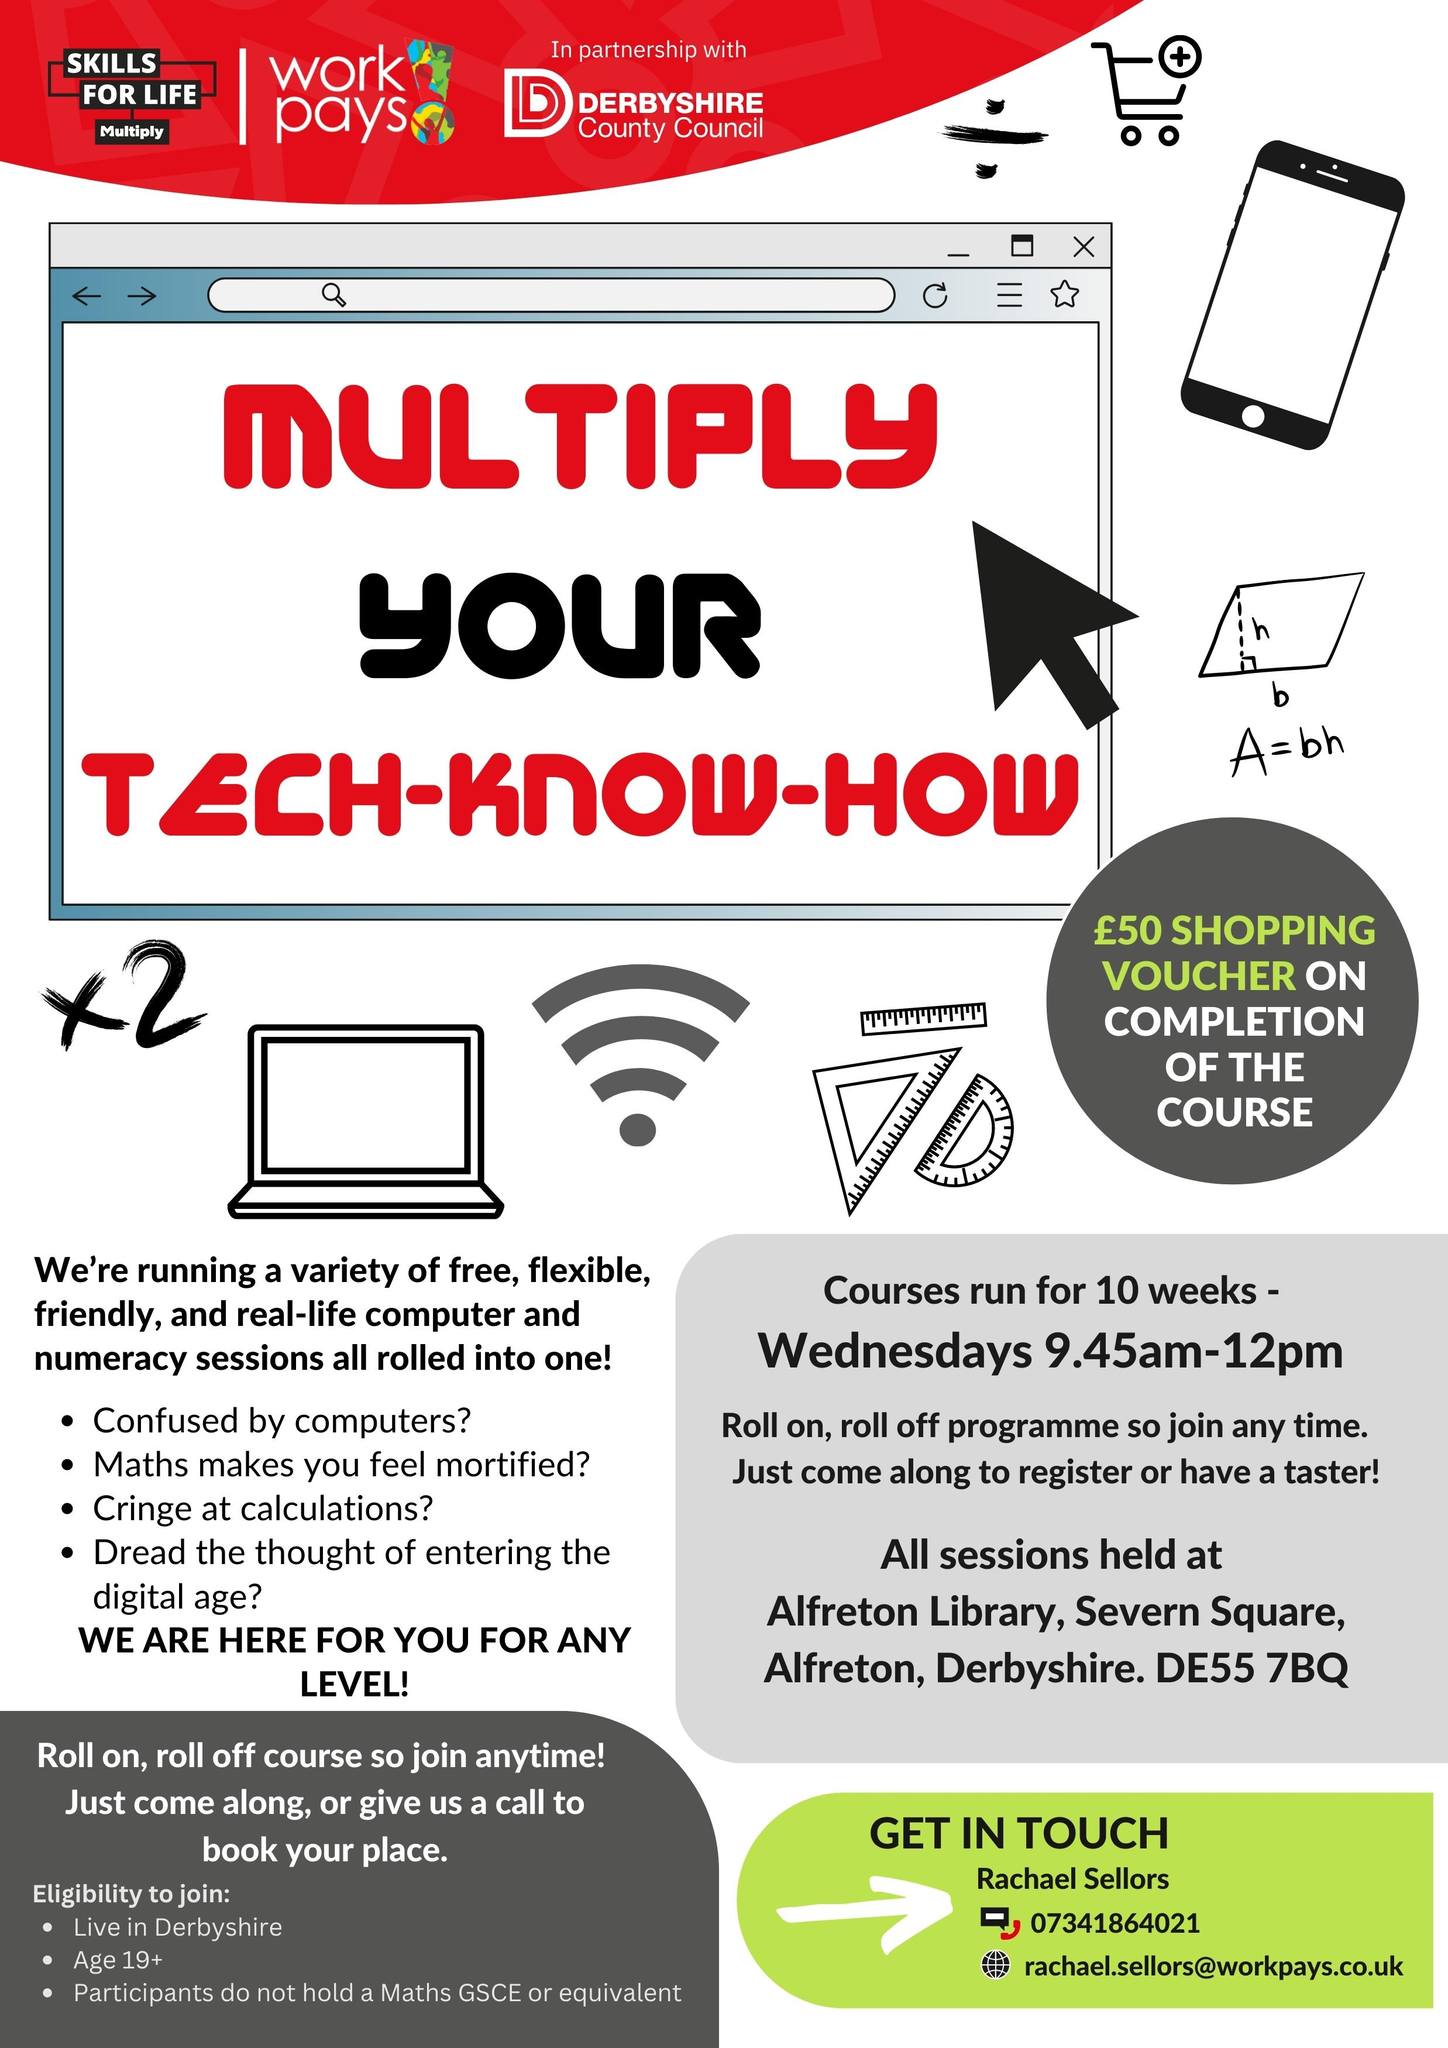 A free maths and computer course is available at Alfreton Library